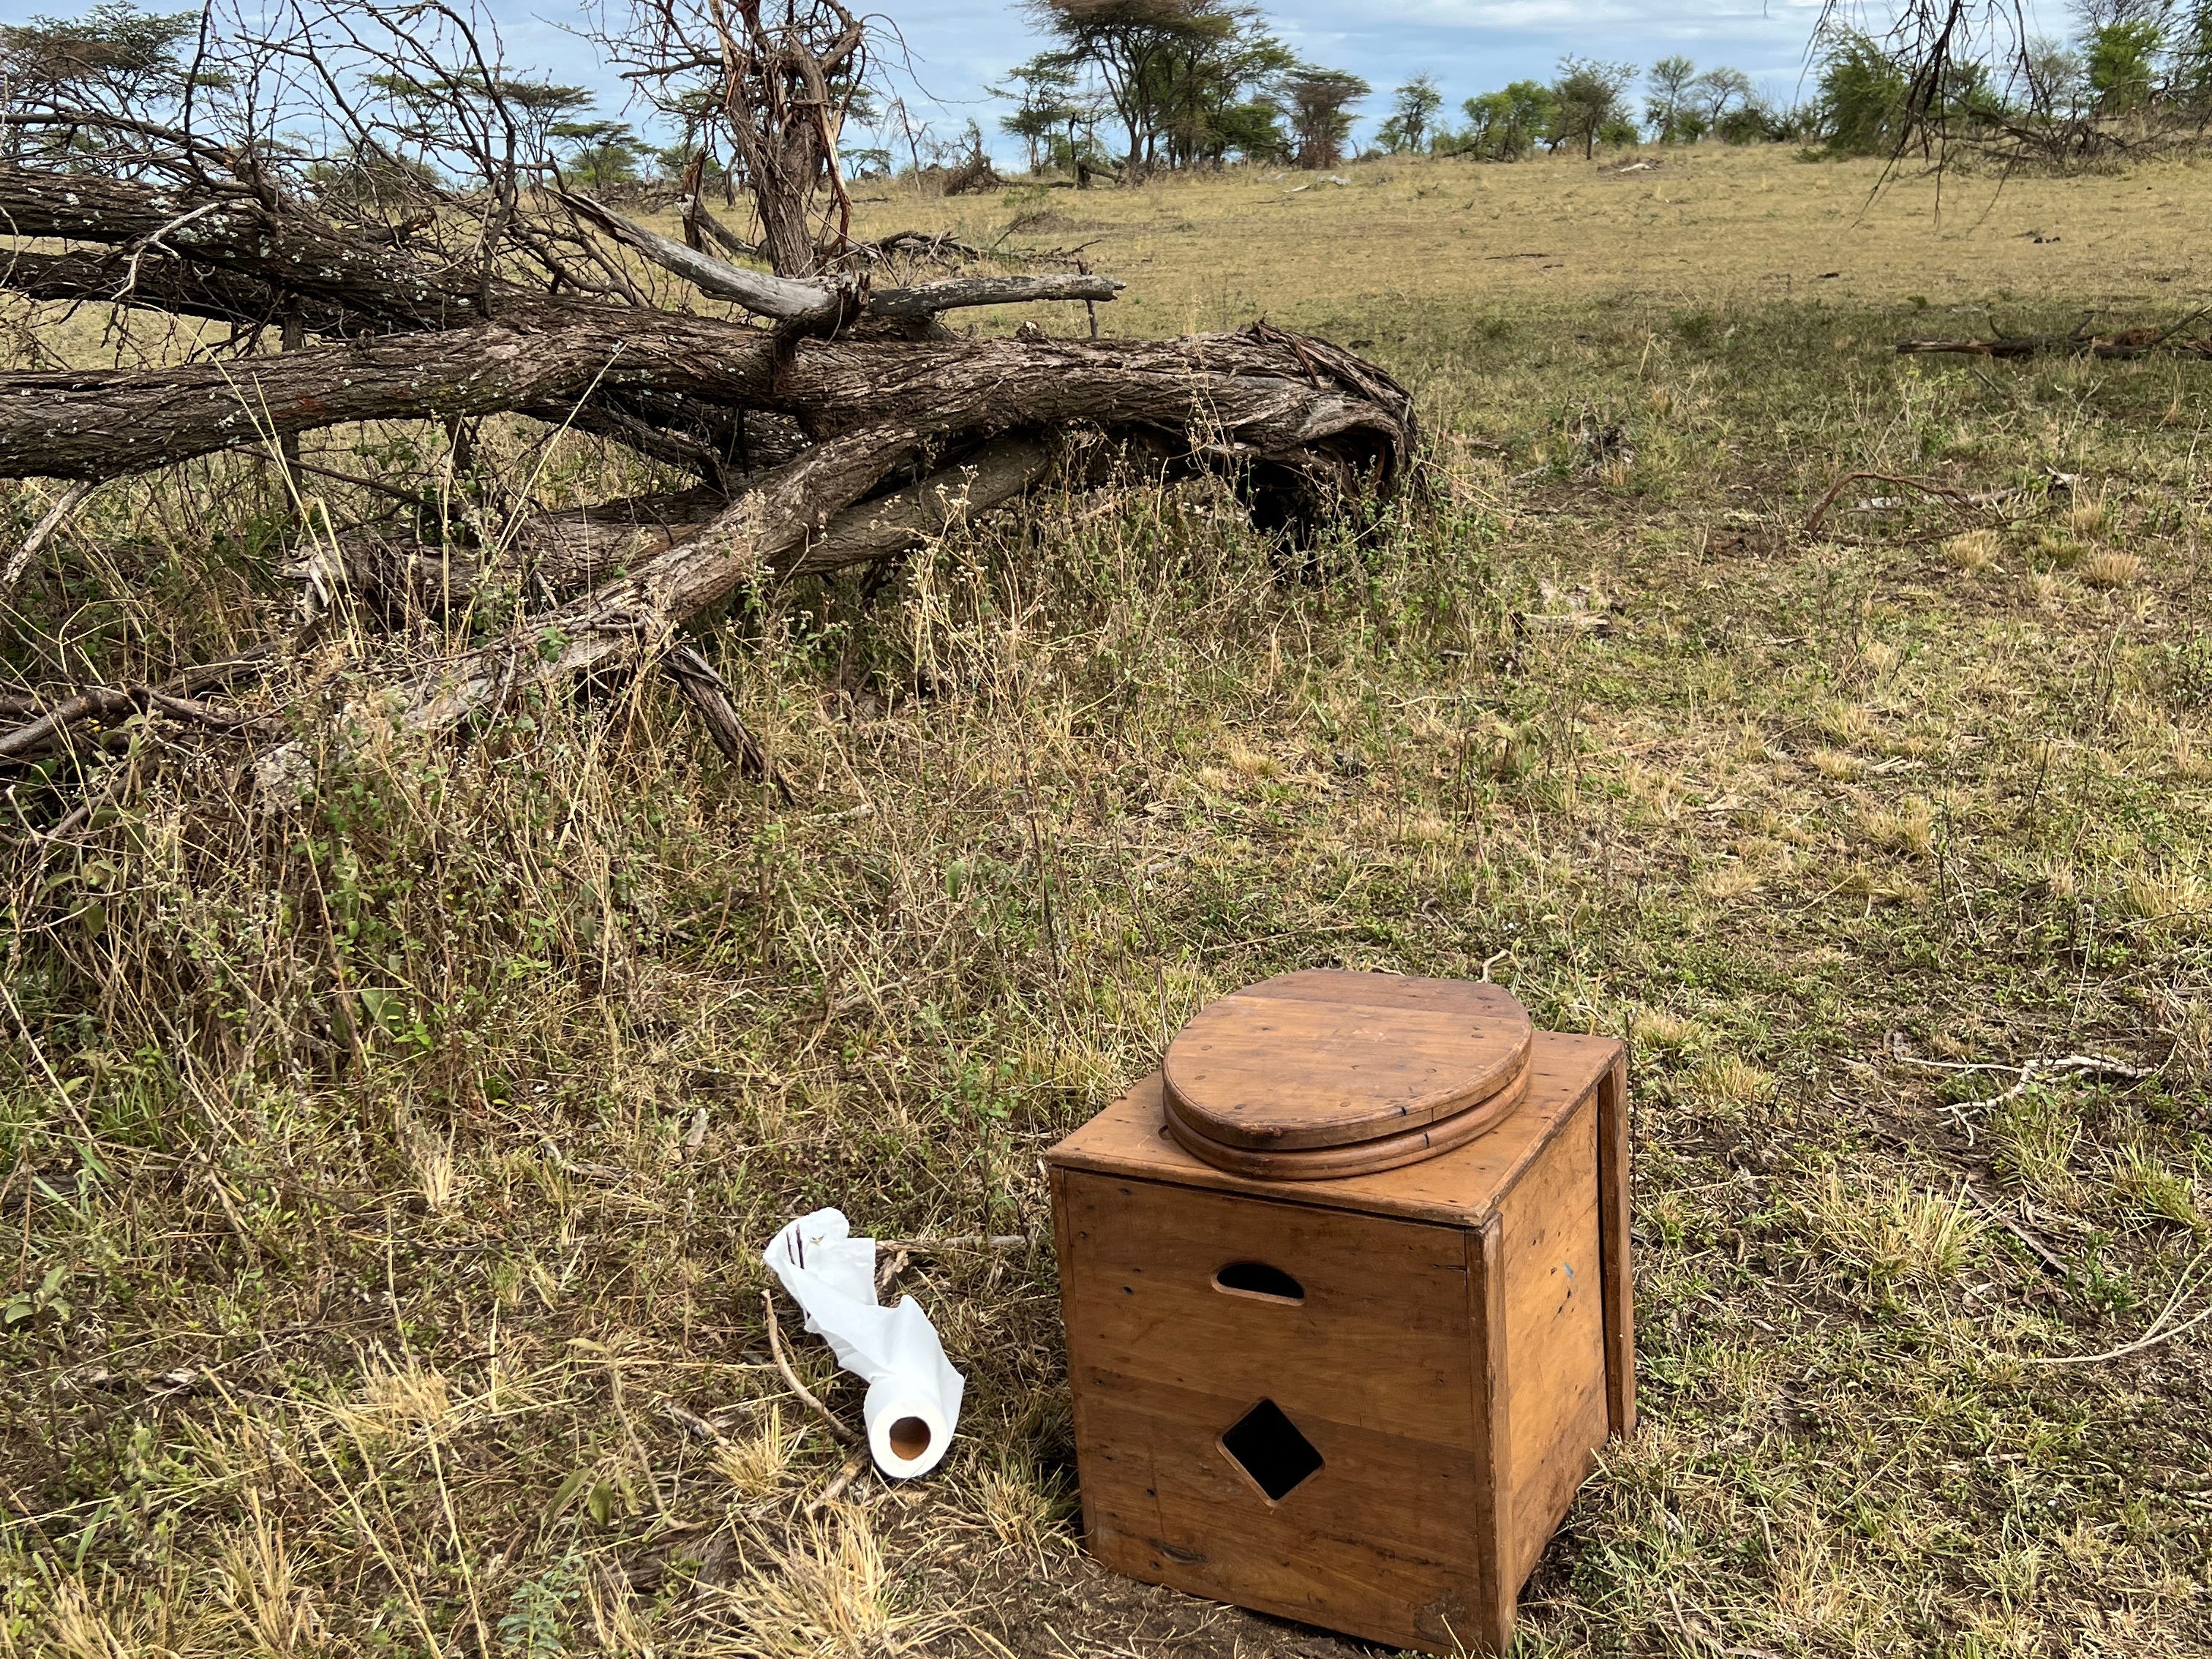 <p>When you're offroading looking for wild animals, you can end up pretty far from a proper toilet.</p><p>On most safari days, the car stops (when guides think it's safe), and people go behind the car to do their business.</p><p>This was the only time we had this portable toilet while out on a safari. On my budget safari day trips at Kruger, we'd have to wait until we reached a rest-stop facility.</p>